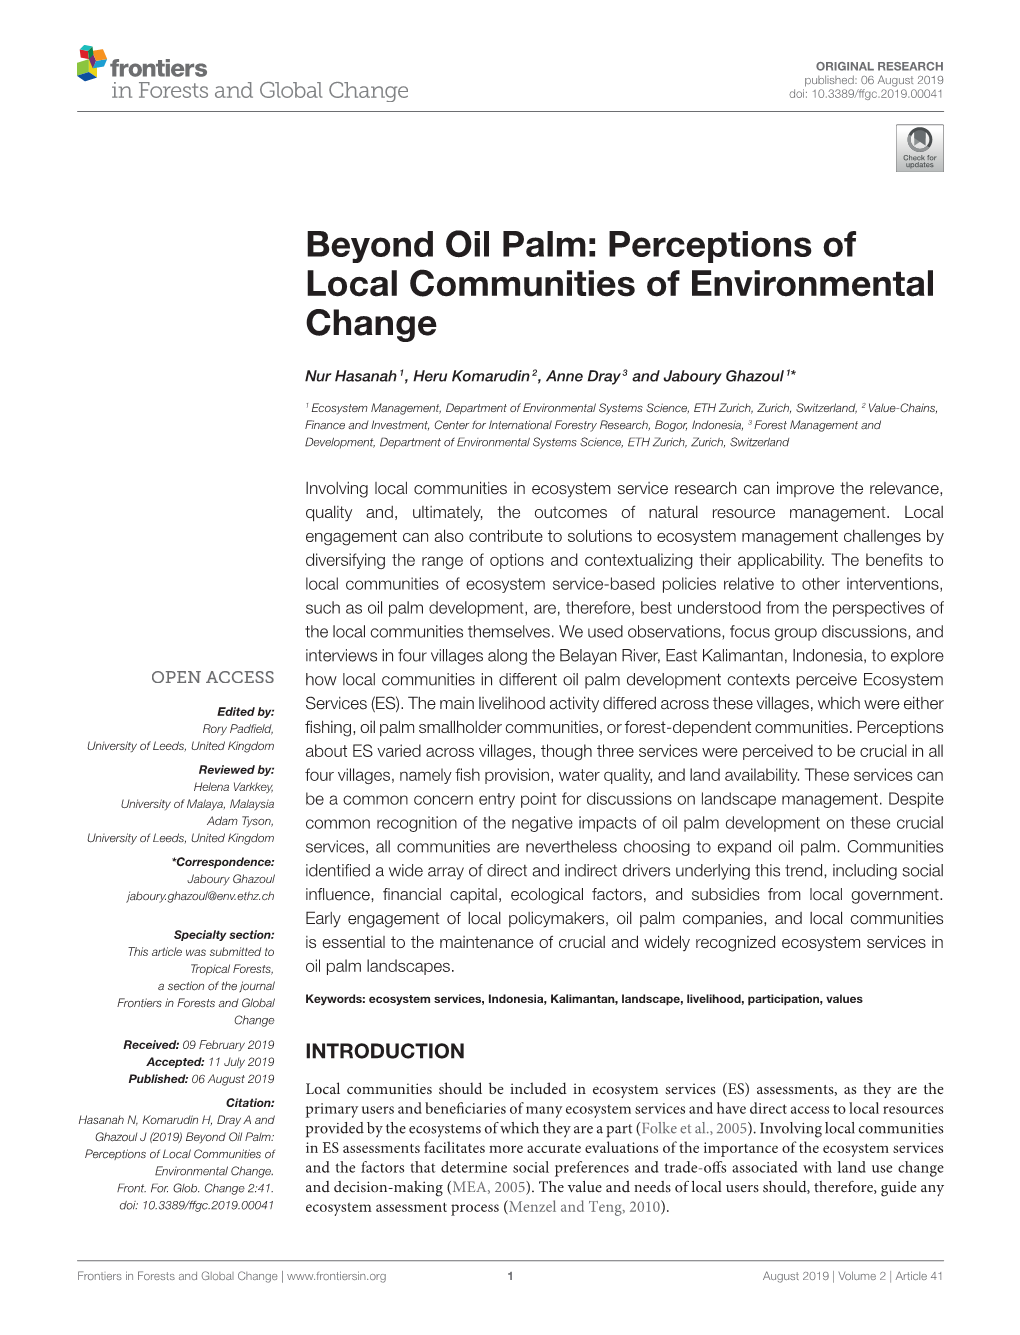 Beyond Oil Palm: Perceptions of Local Communities of Environmental Change